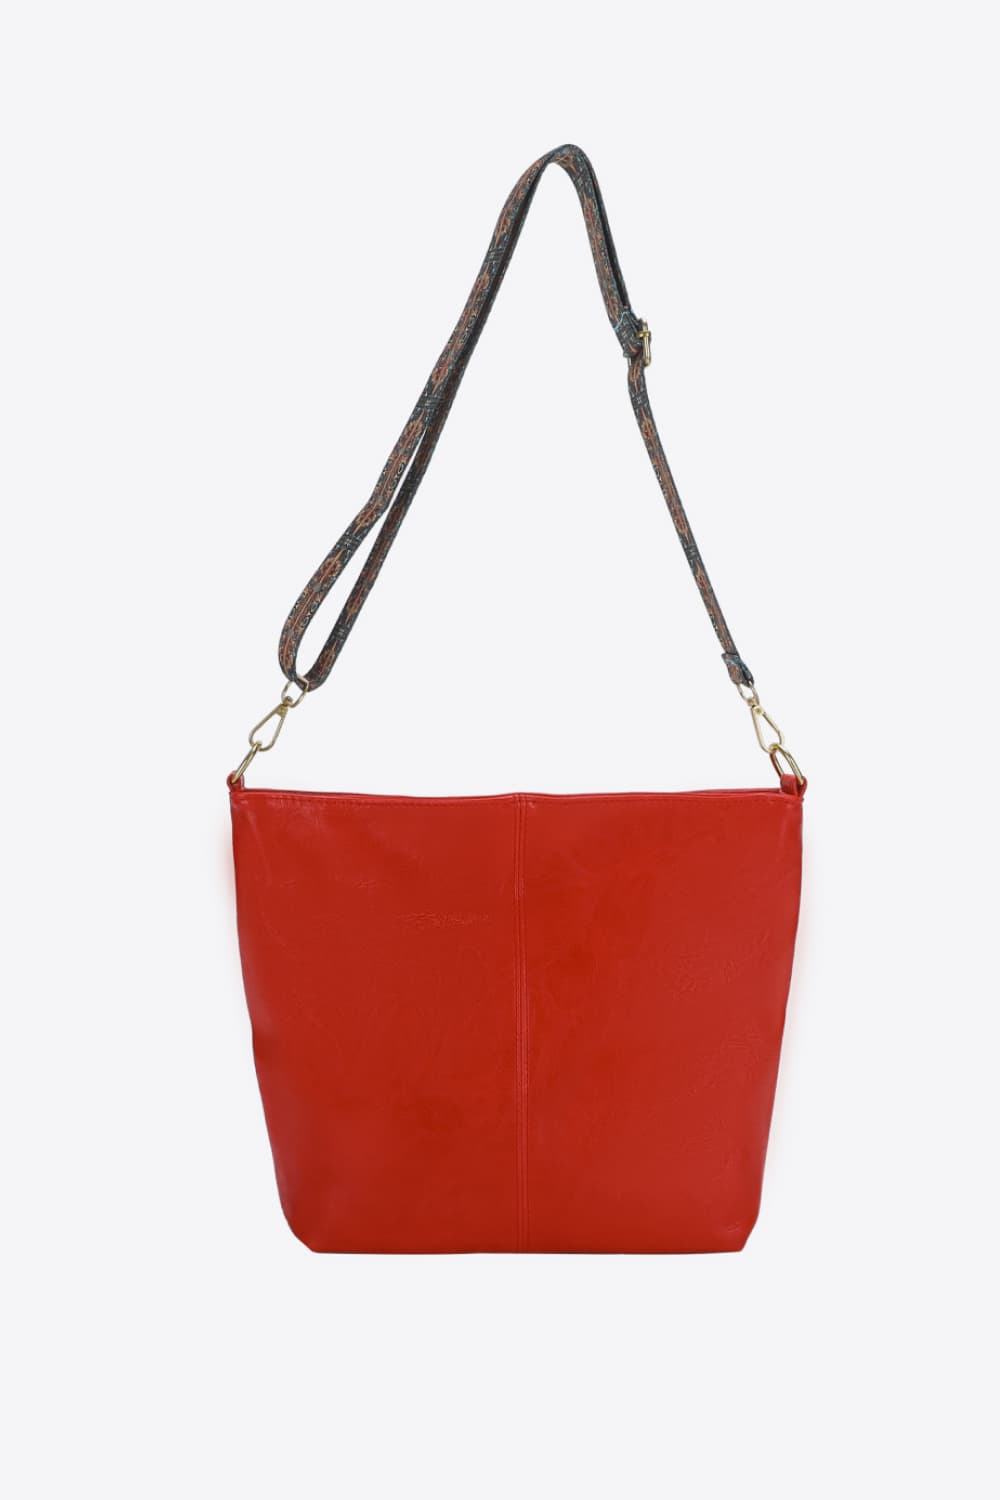 PU Leather Crossbody Bag Red One Size